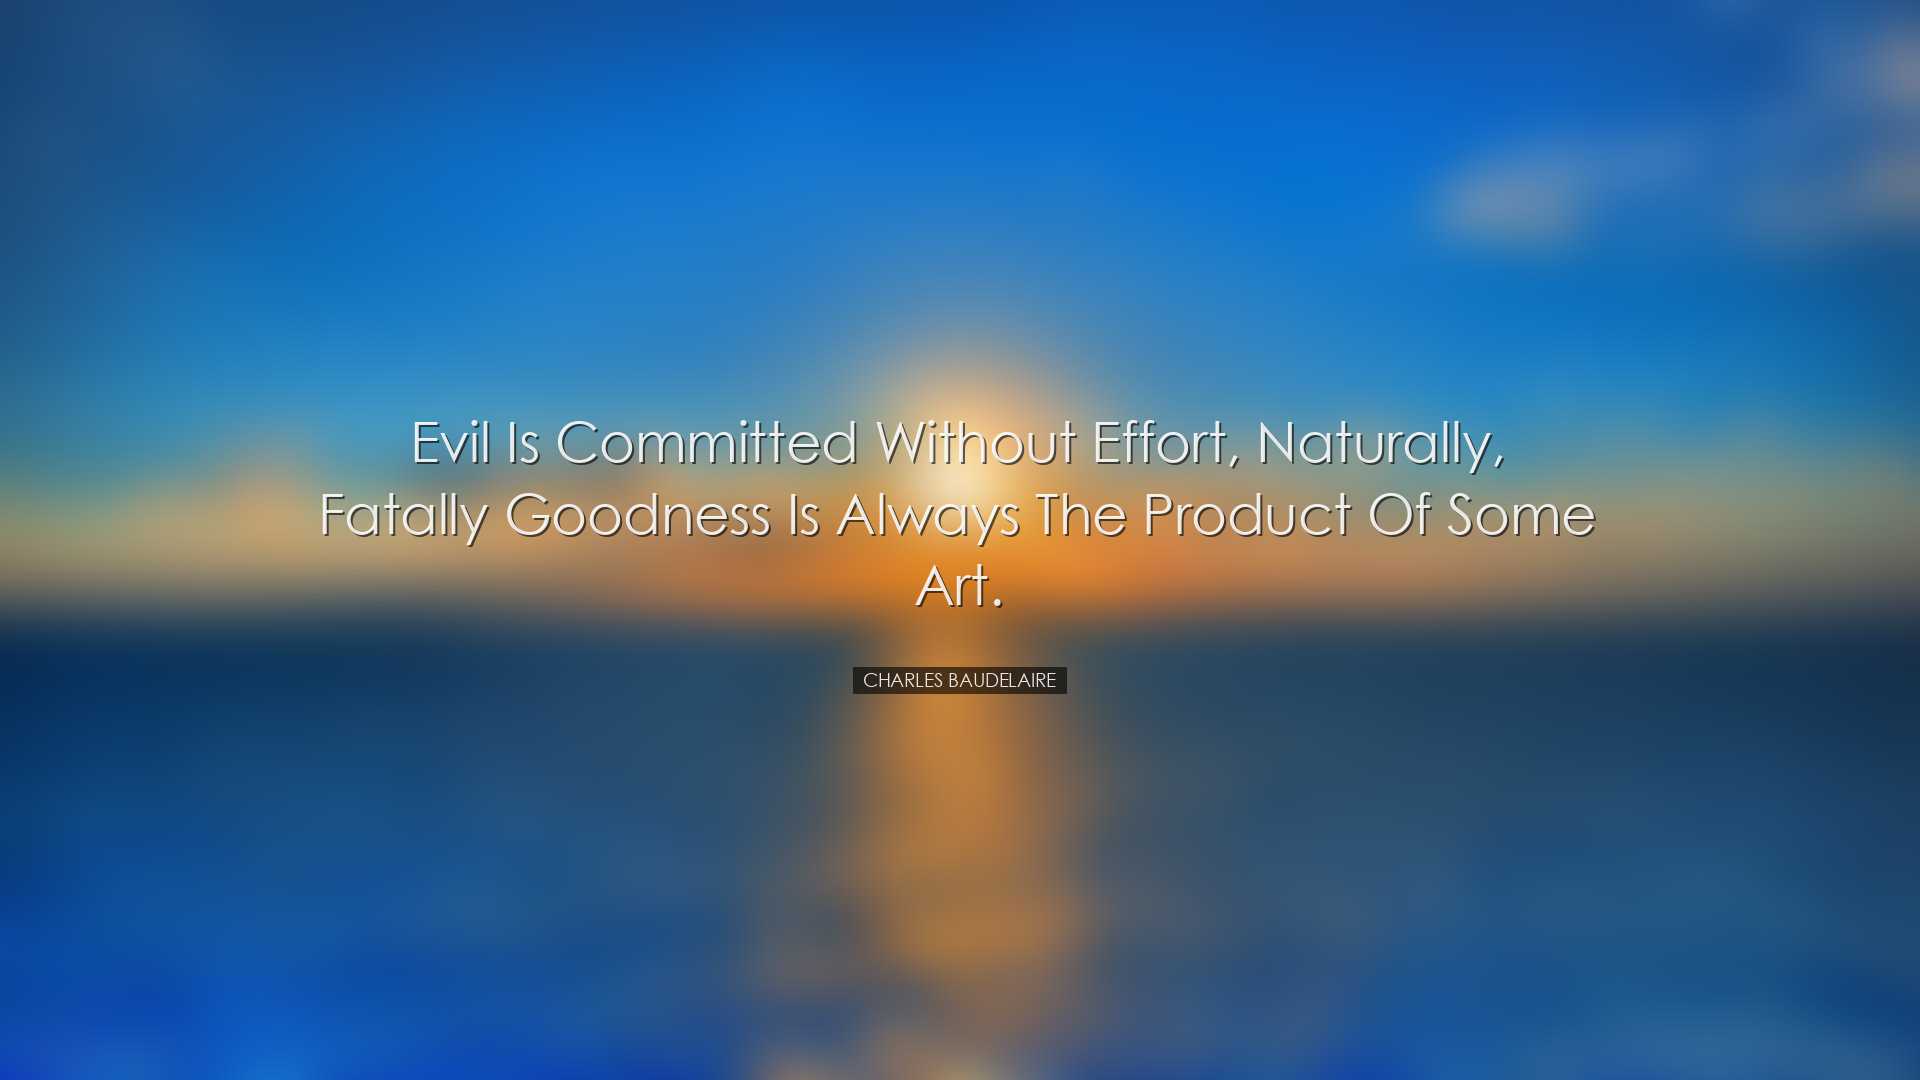 Evil is committed without effort, naturally, fatally goodness is a